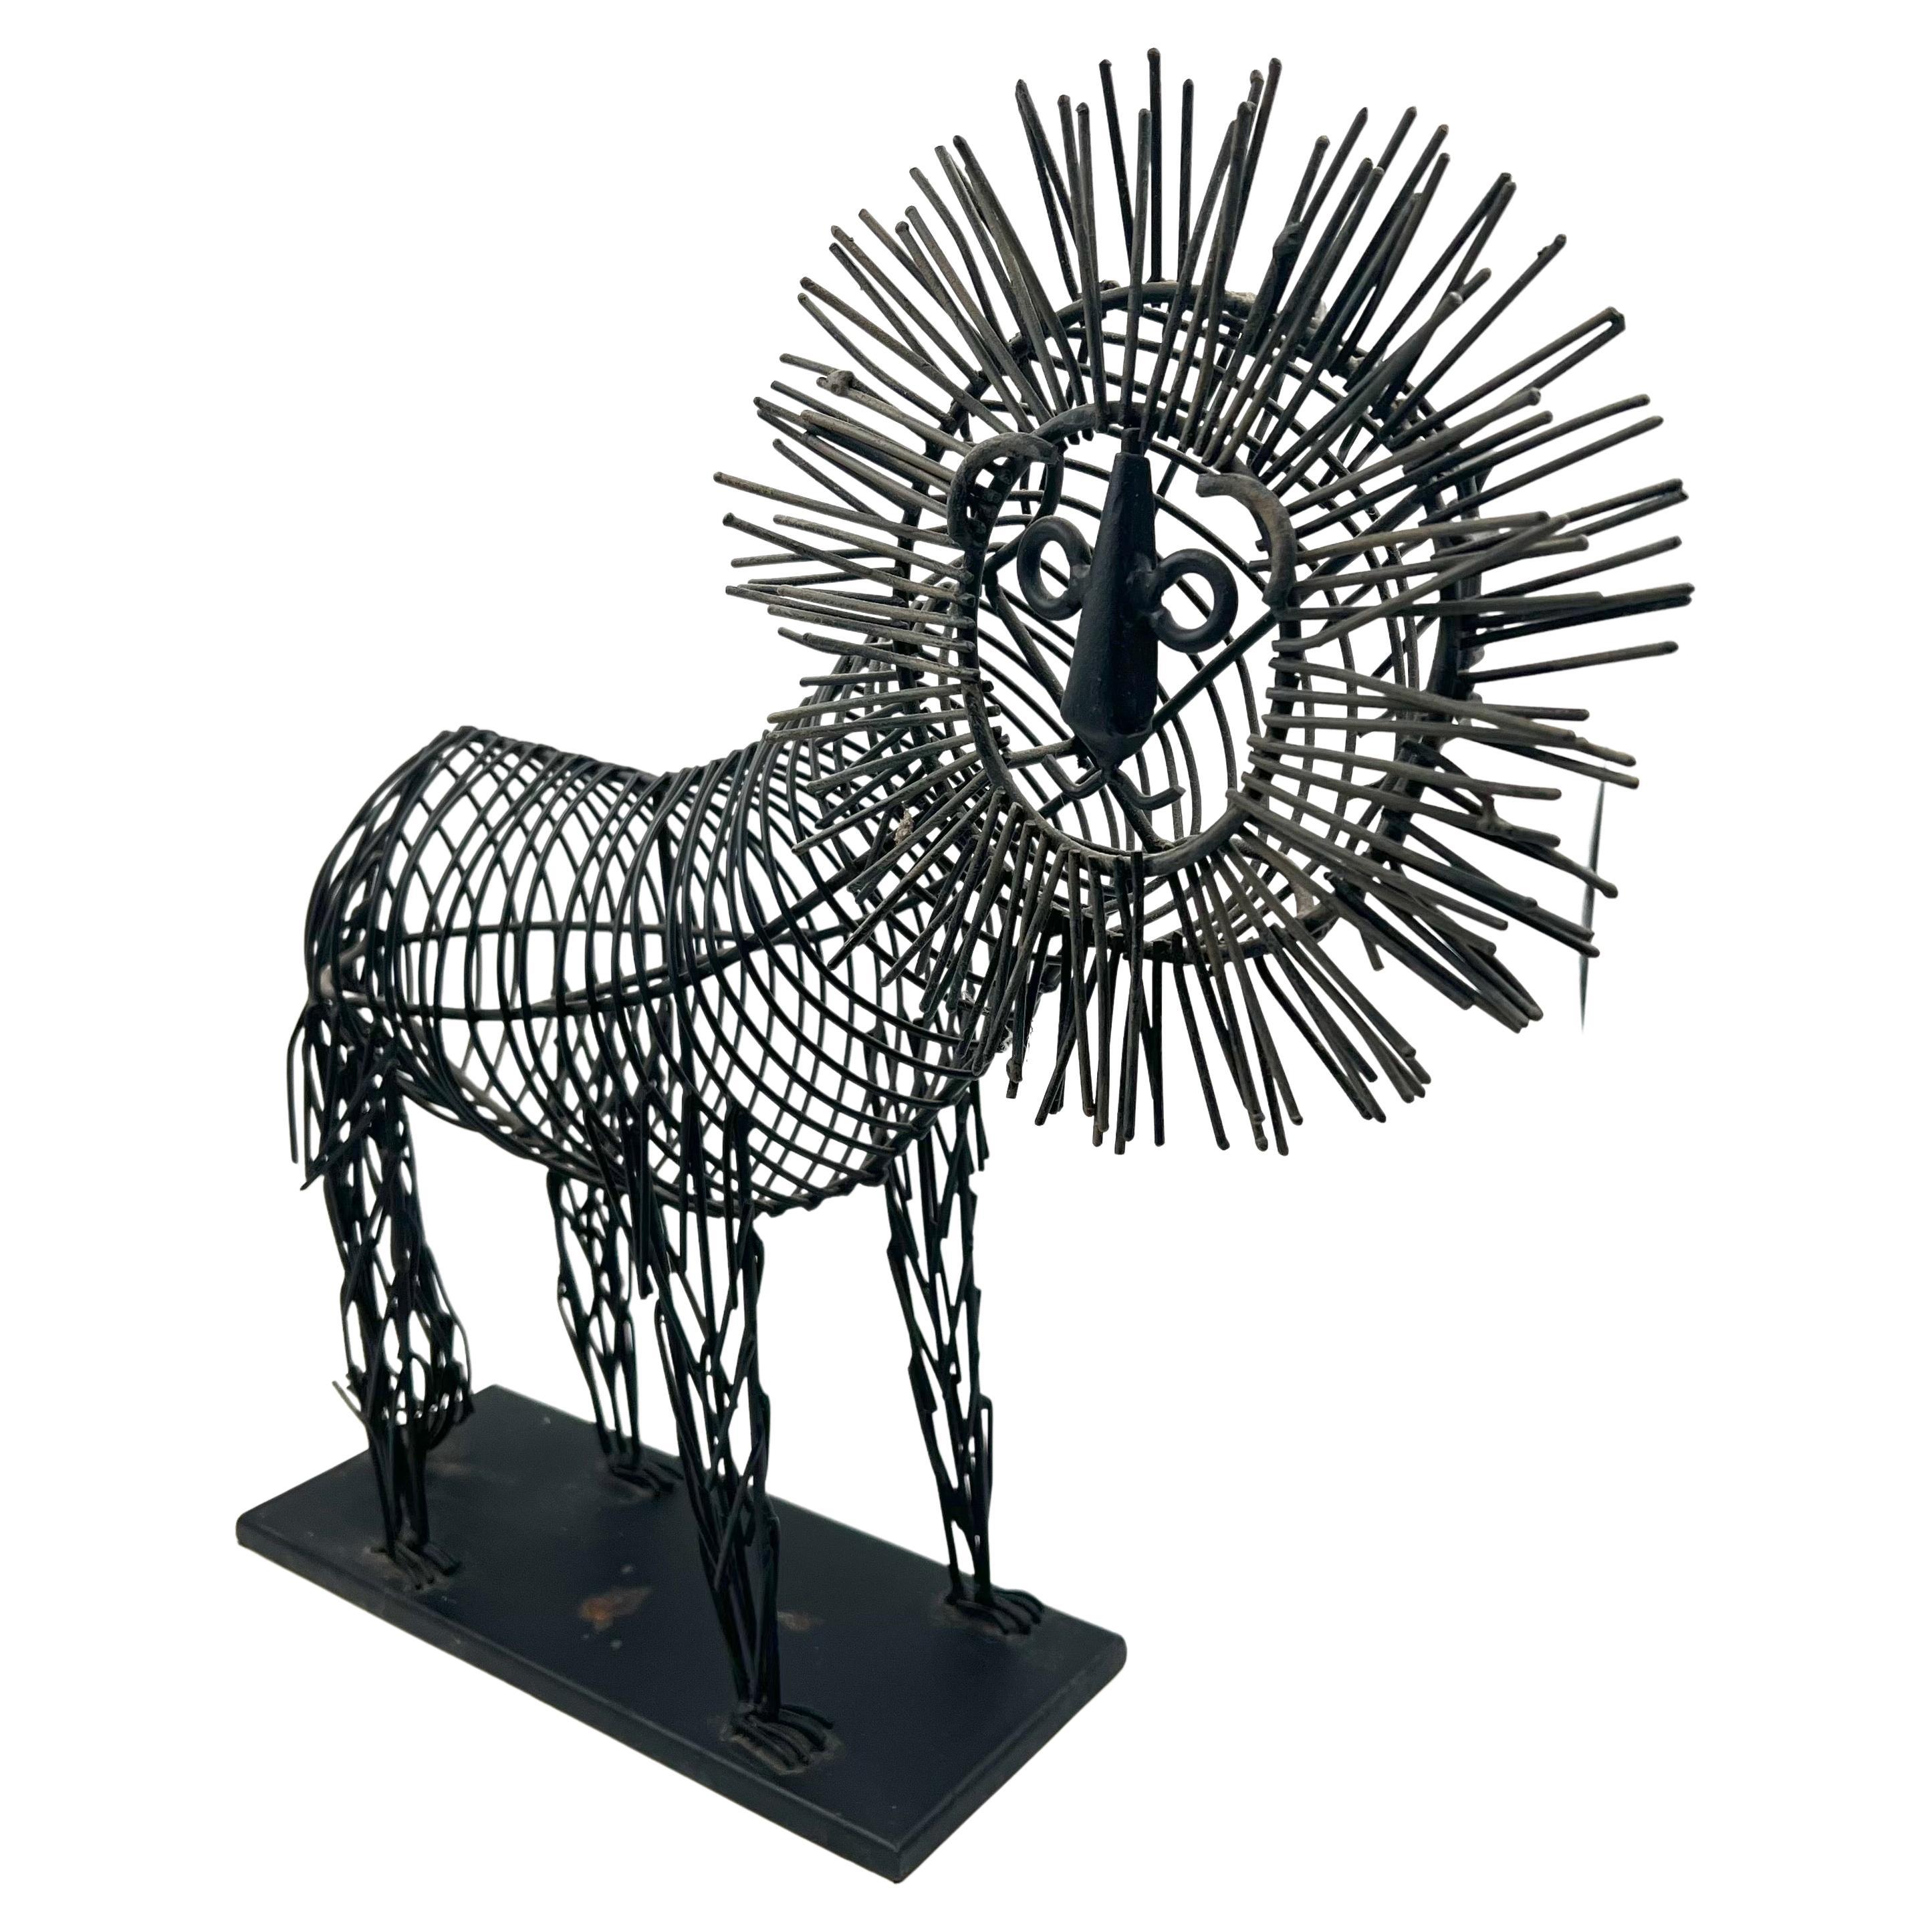 Metal wire sculpture of a lion on a black metal base. The body is black metal wire and the mane is tinted in gold. In the style of C. Jere, circa 1990s.